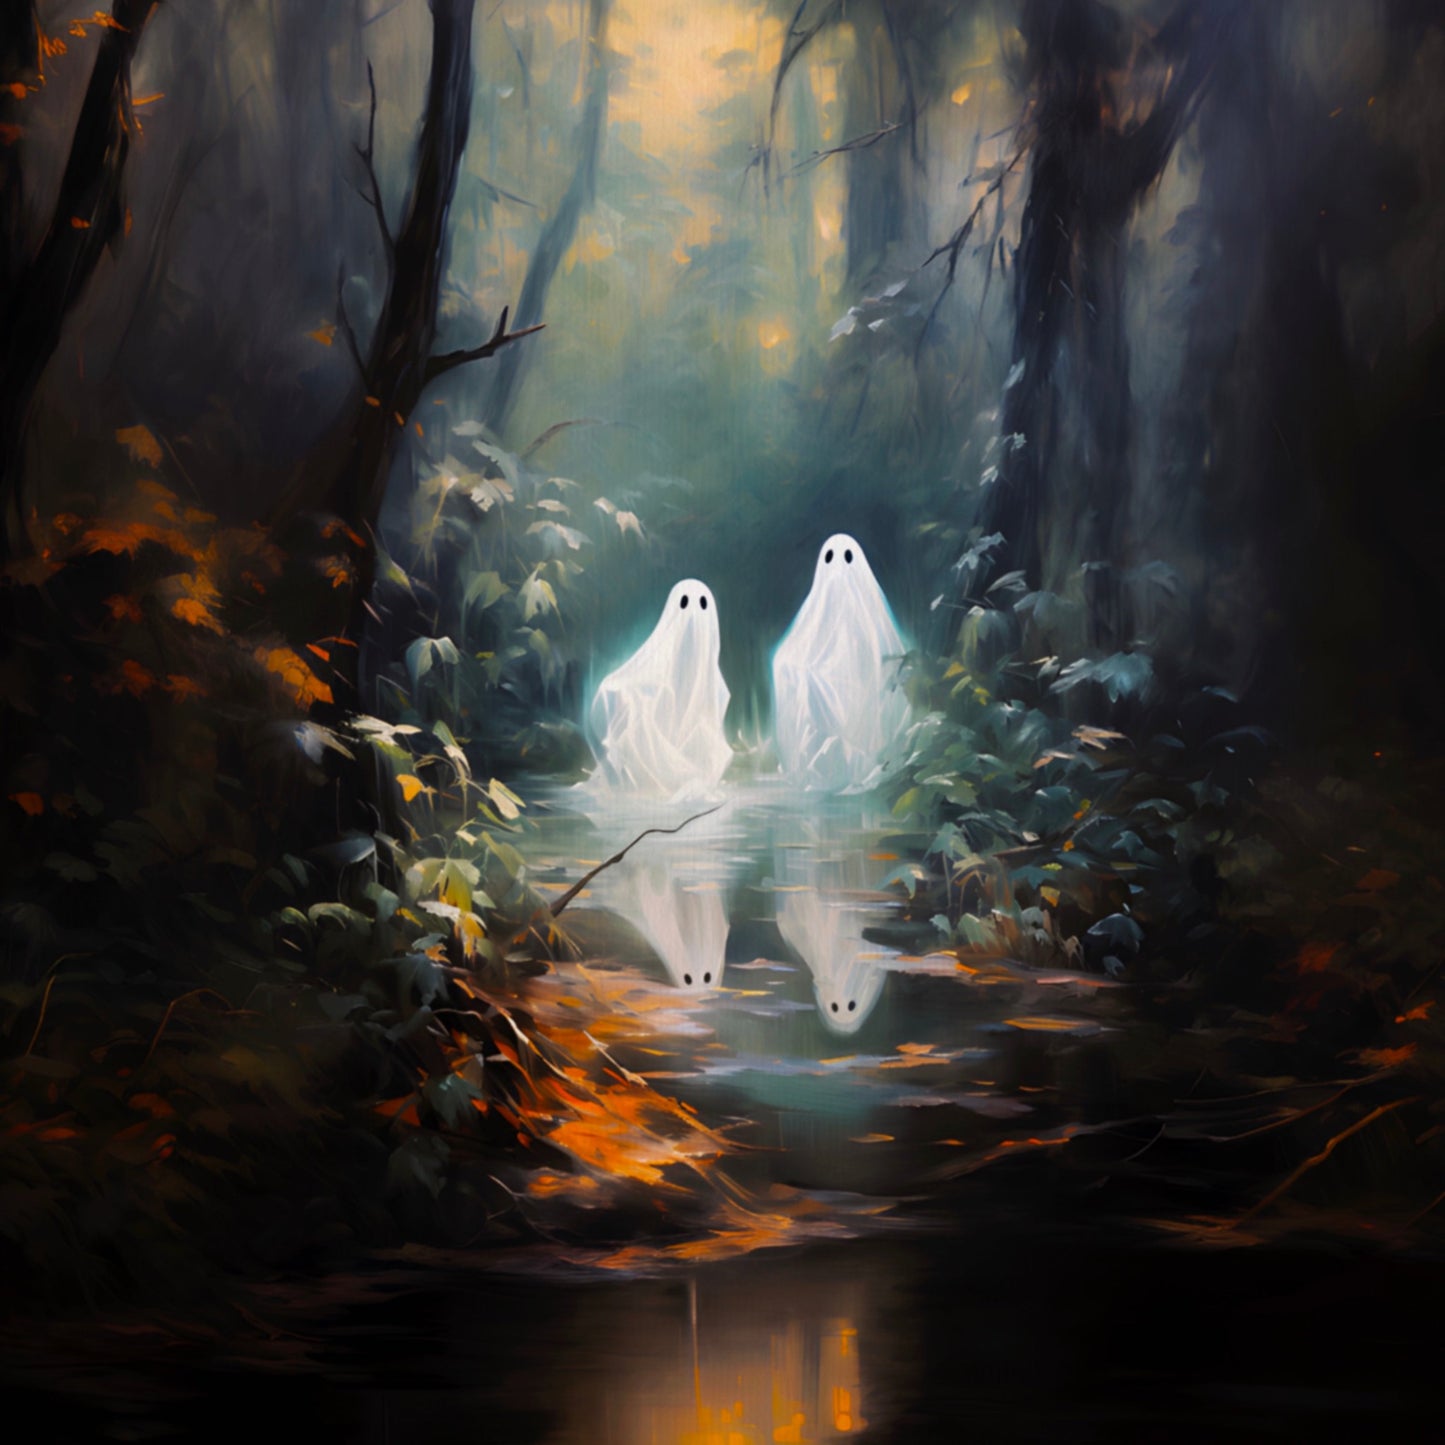 Ghosts in a Spooky Forest